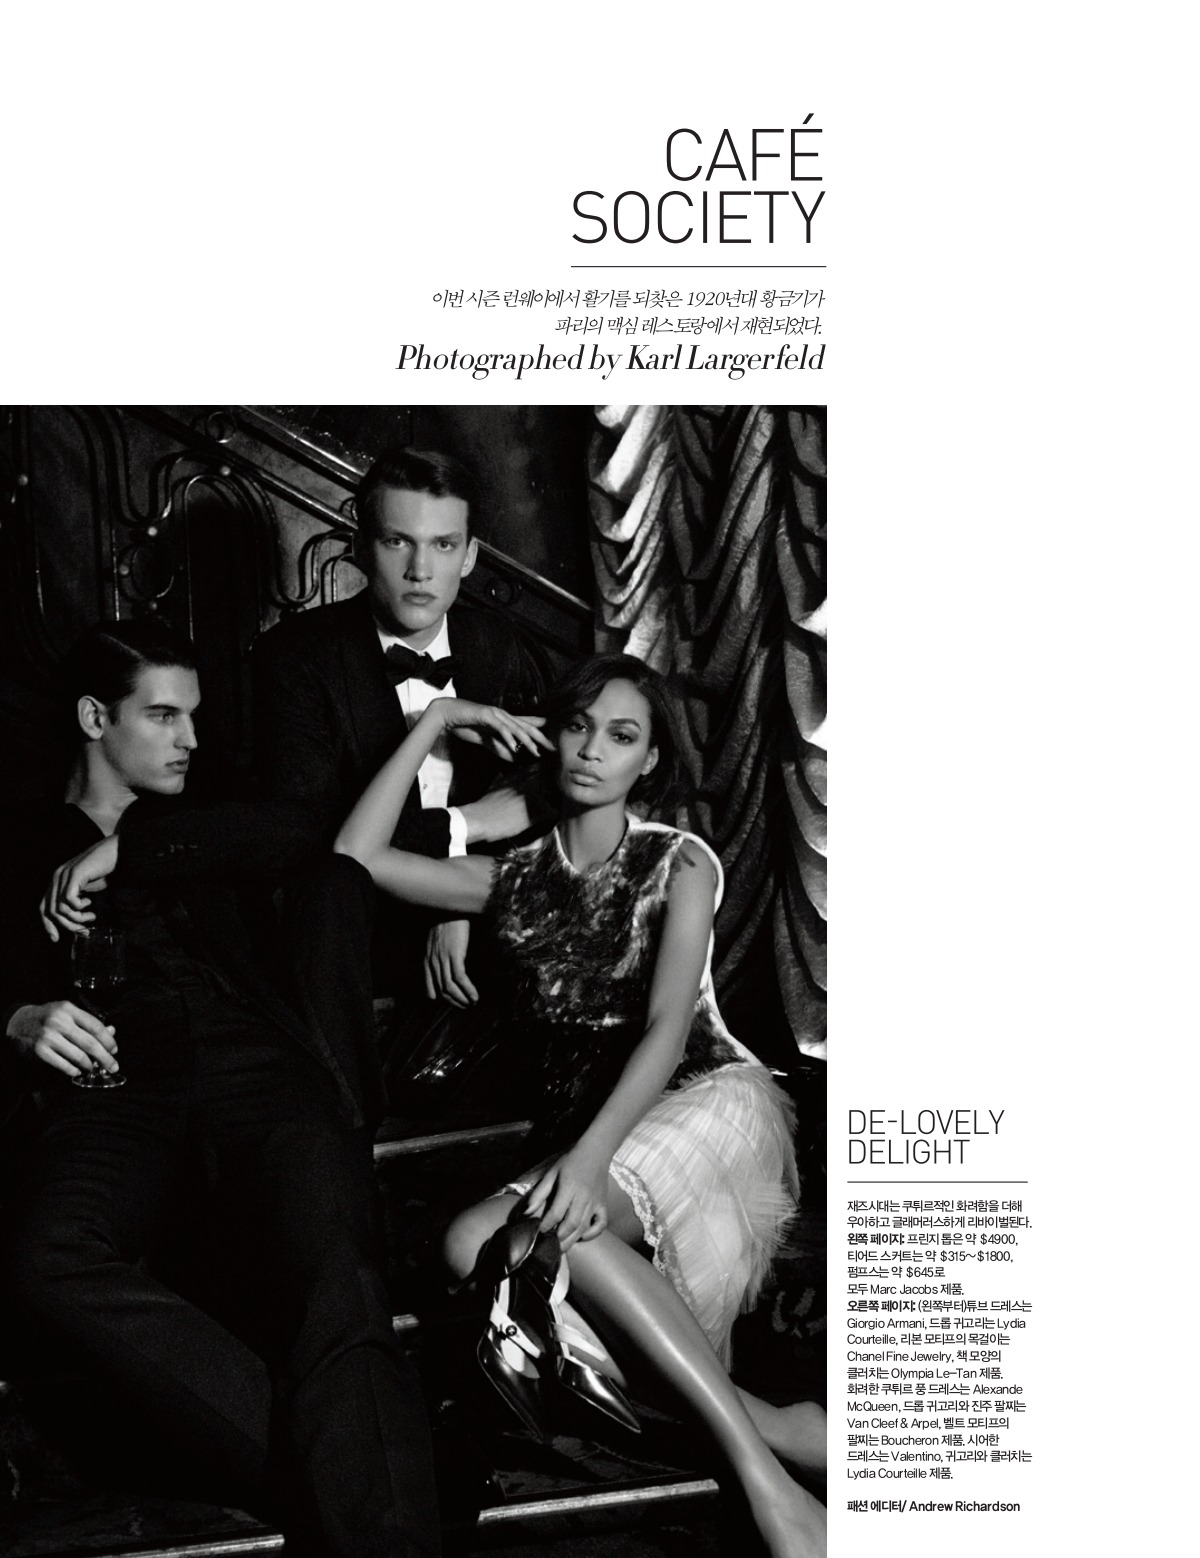 Societies журнал. Chanel Cafe Society. Marc Jacobs Delight.